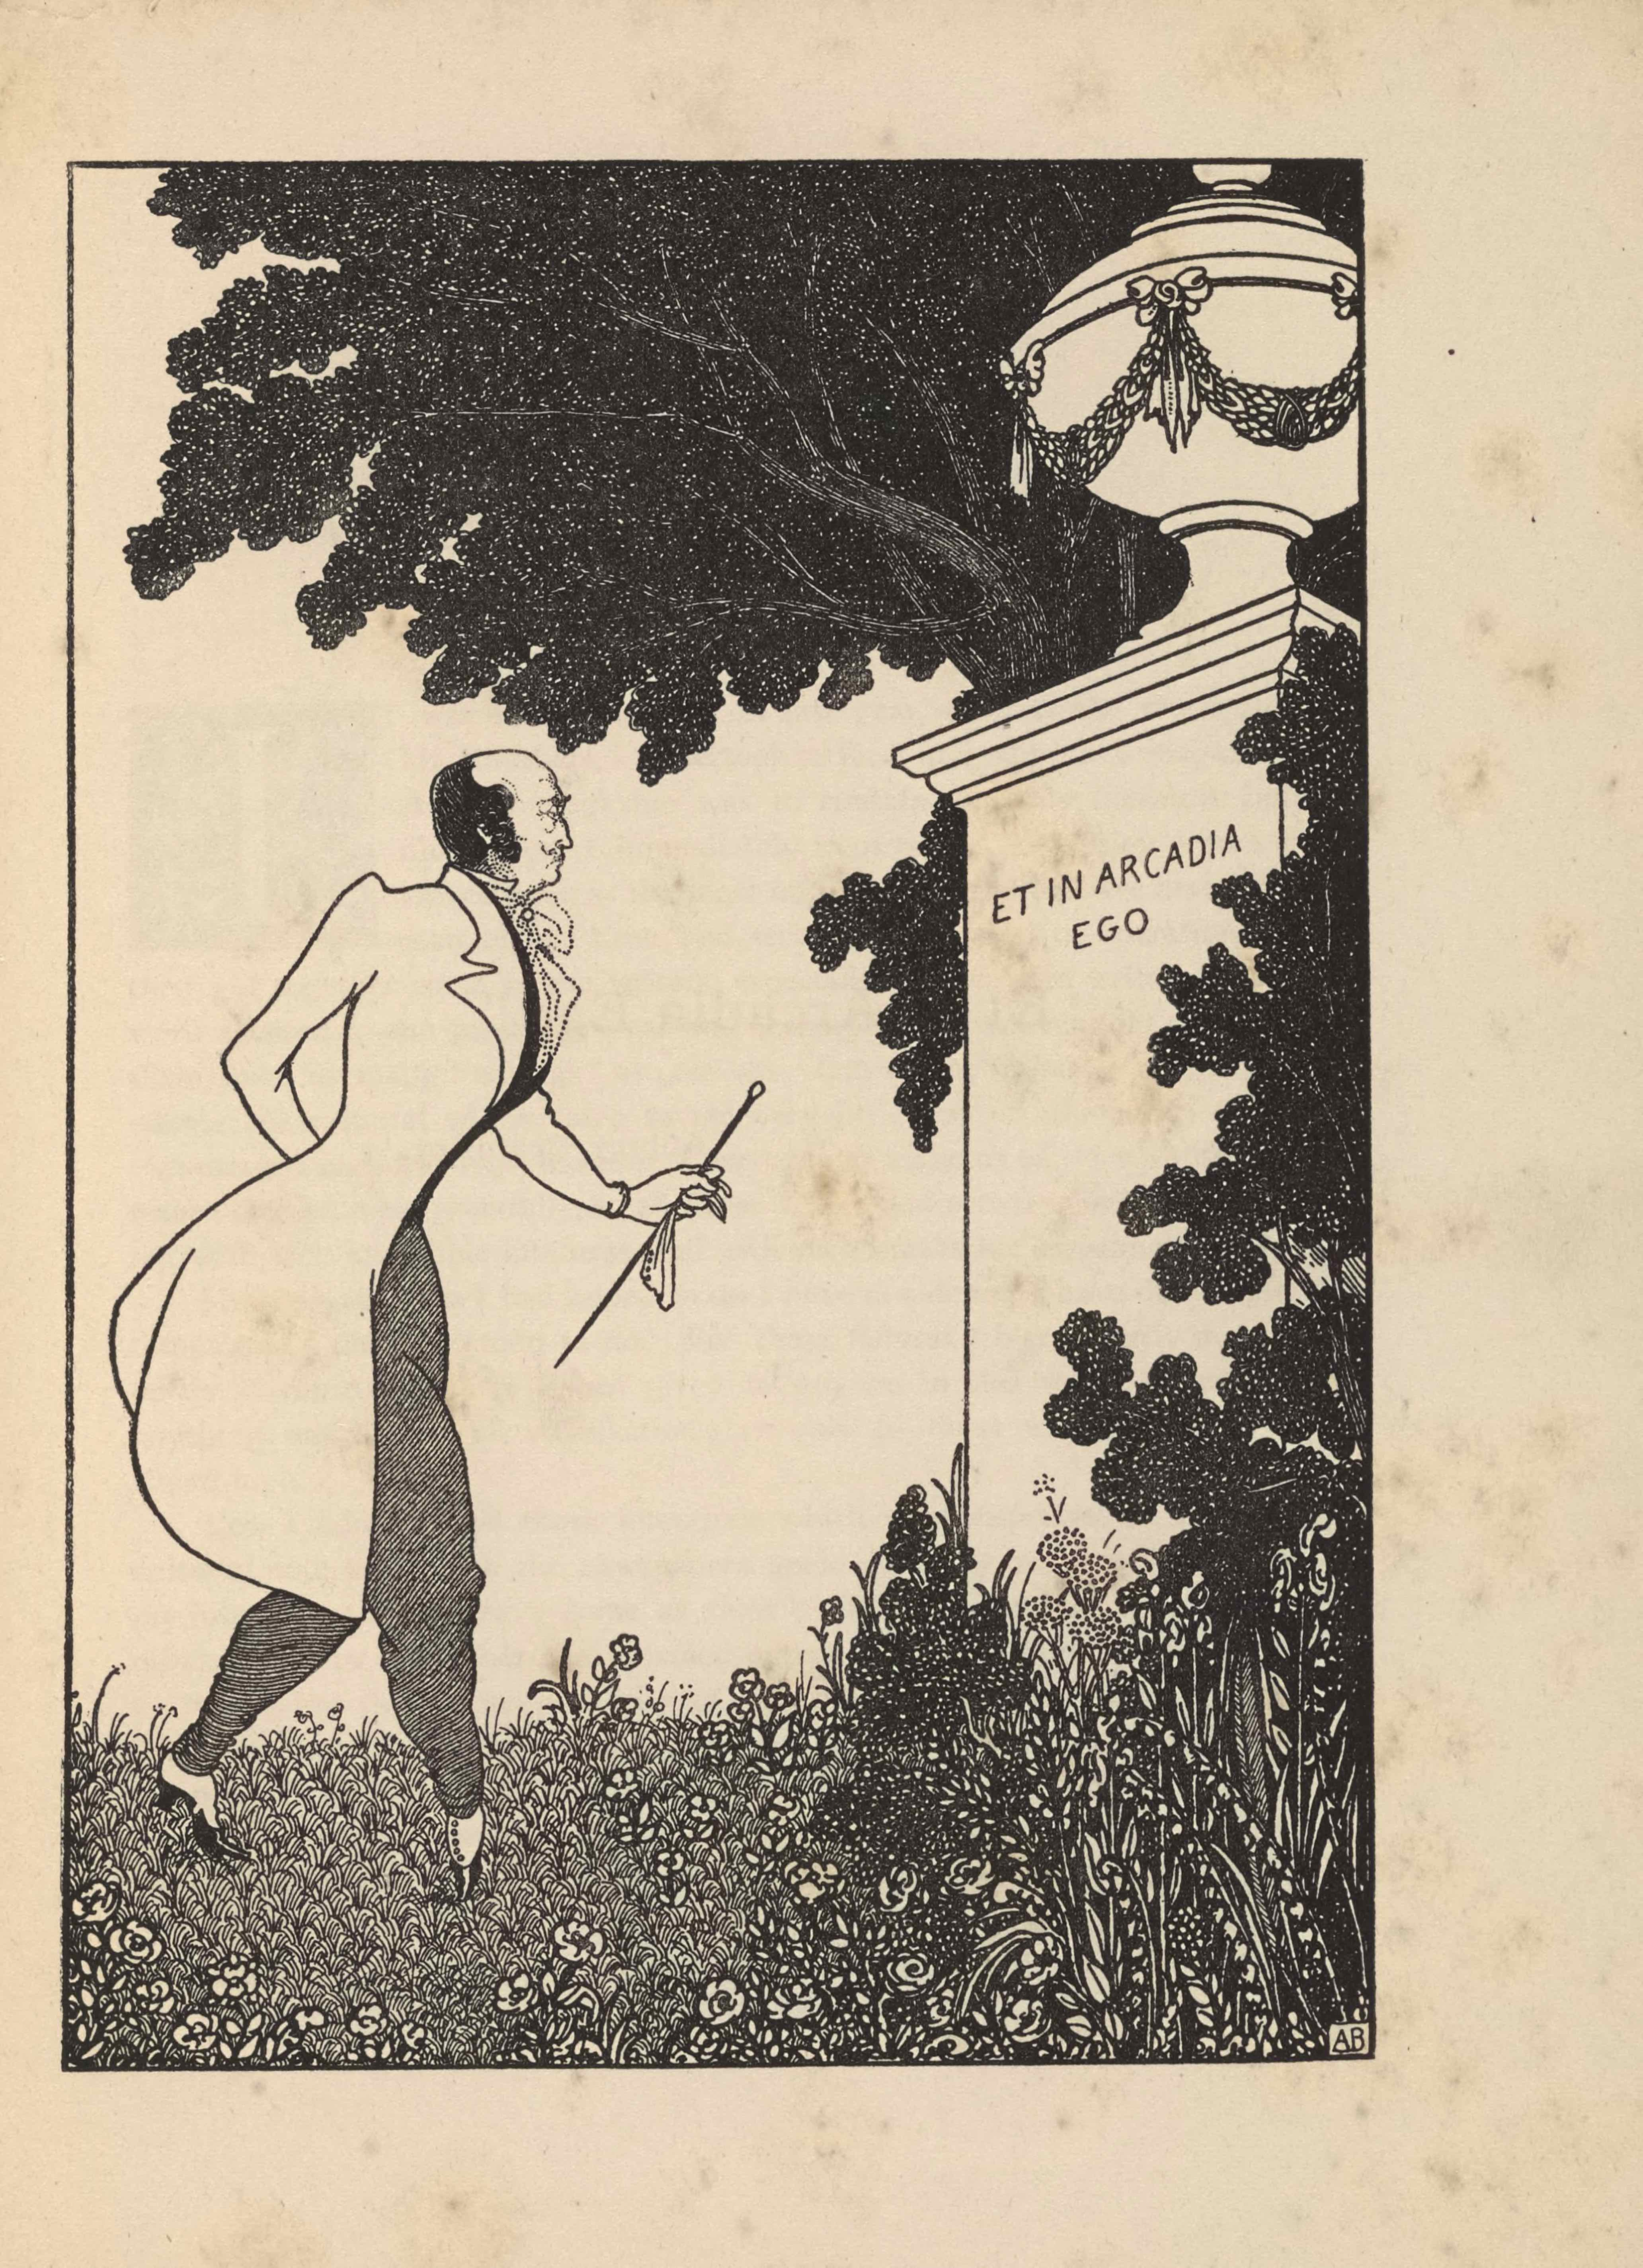 The framed illustration, in portrait orientation, uses a line-block reproduction of Beardsley’s pen-and-ink design.. The image depicts a contemporary man in a tailcoat in a garden or park standing before a large column with an urn on top. Situated on the right of the composition, the tall white column is partially covered by the leaves of a tall bush. Around its base there is long grass and a variety of plants and flowers. On the column is etched the illustration’s title: “ET IN ARCADIA EGO” [caps]. Atop the column rests a large covered urn with a thin base and a rounded body. The body of the urn is wreathed in a looping garland that is tied with evenly spaced bows. The top of the urn is tiered; atop the smallest tier rests a circular knob. A dark tree extends up from behind the column, it continues to the left side of the image and gets cut off by the top edge of the illustration. The grass on the left side of the image is shorter, A man stands on the left of the composition in profile, facing the column on the right. He is in mid step towards the column. He has a black mustache and black hair; he is balding. He has a white tailcoat that extends down to his knees. He has a black shirt under the coat and a white cravat at his neck. He has grey trousers on that are tucked in at the bottom into white and black pumps. His right hand is tucked behind his back. His left hand is extended out slightly. In it he holds a white handkerchief and cane. The artist’s initials “AB” [caps] are hand printed in the bottom right corner of the image.